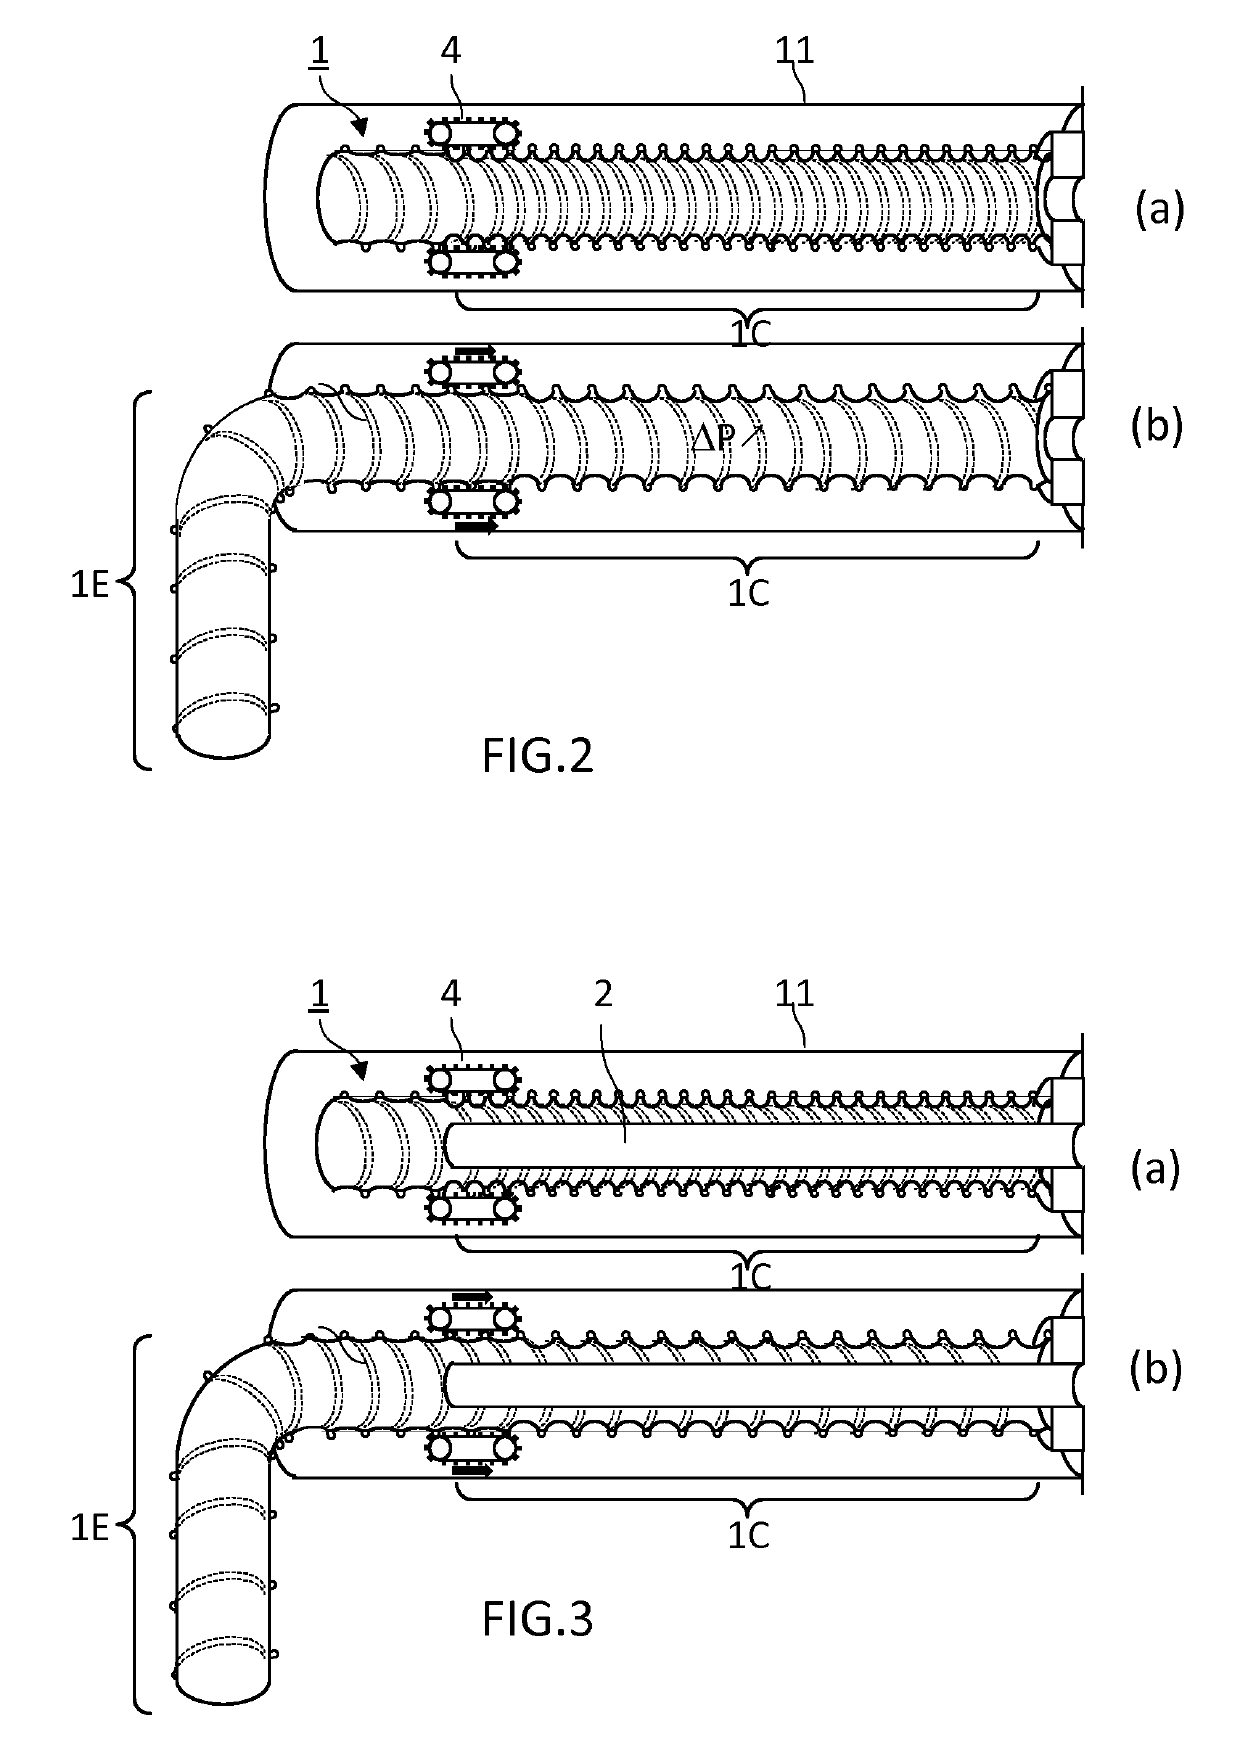 Device comprising a drive system for extending and retracting a conditioned air hose